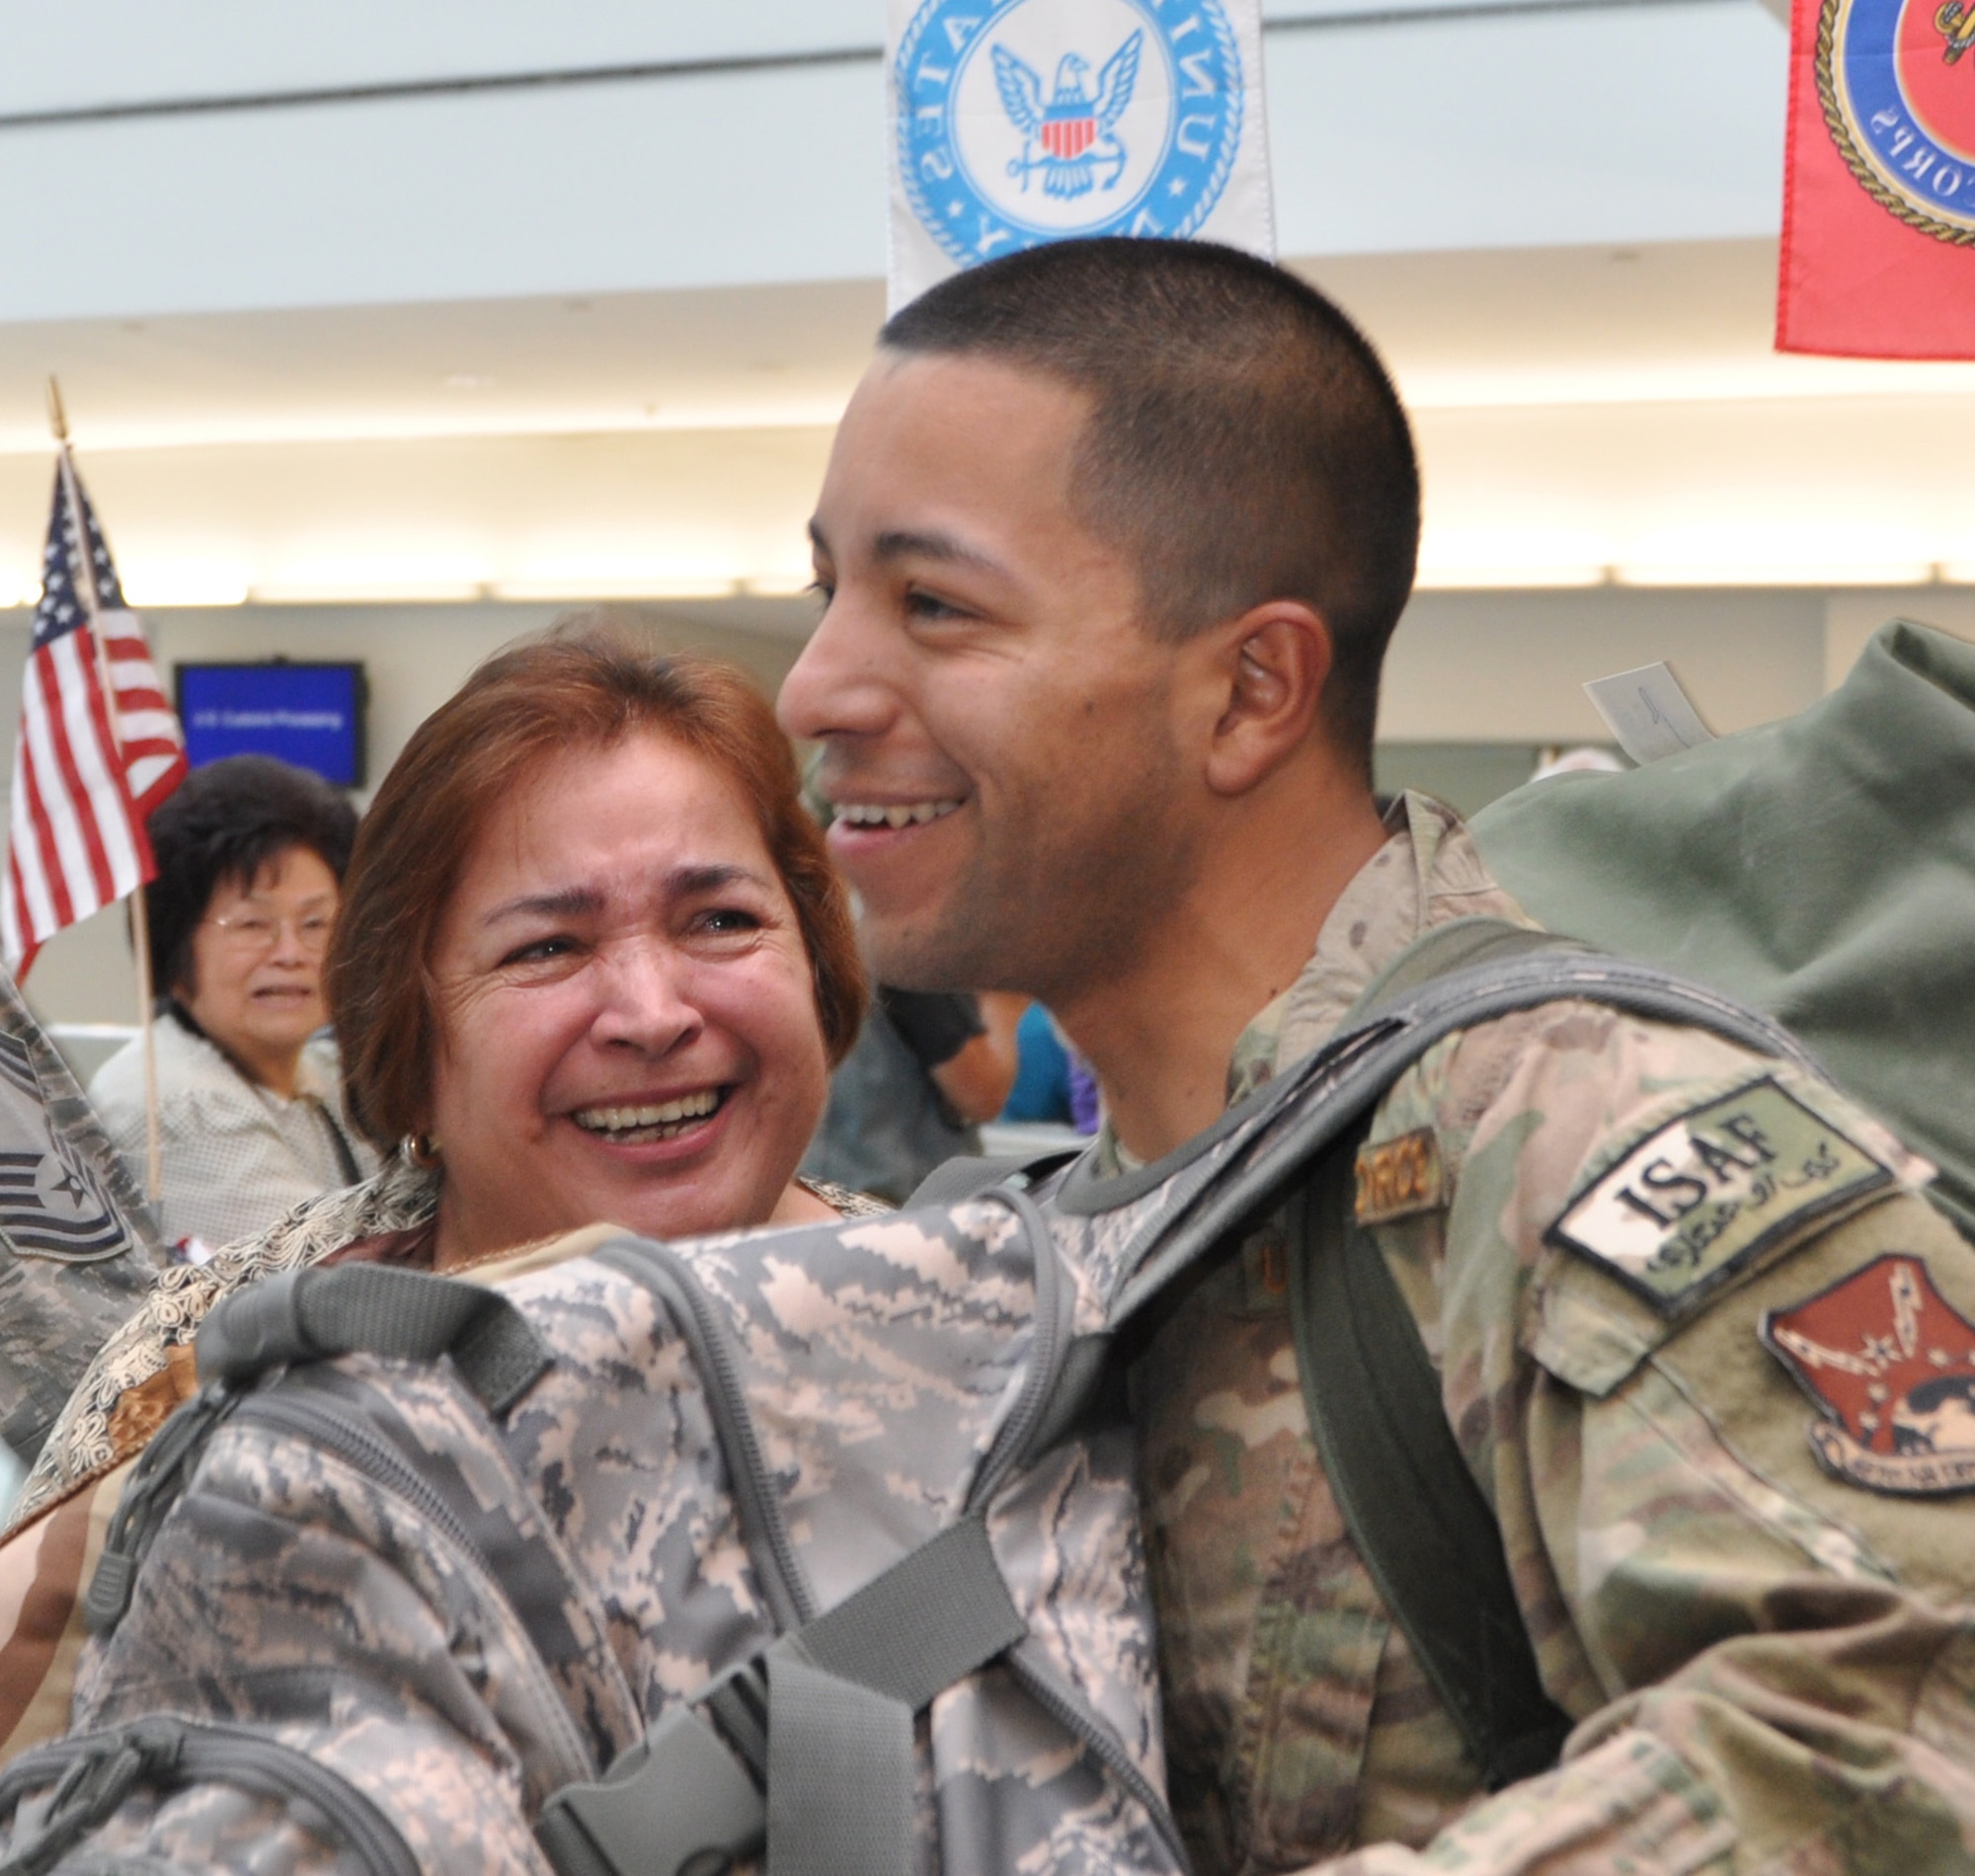 U.S. Air Force Staff Sgt. Diego Yanez, 69th Aerial Port Squadron, smiles as his mother, Martha Yanez, looks at her son as he exits the terminal at Baltimore-Washington International Thurgood Marshall Airport, Md., Aug. 24, 2012. The 69 APS welcomed home 15 troops who were returning from a six-month deployment to Afghanistan. (U.S. Air Force photo/ Senior Airman Katie Spencer)